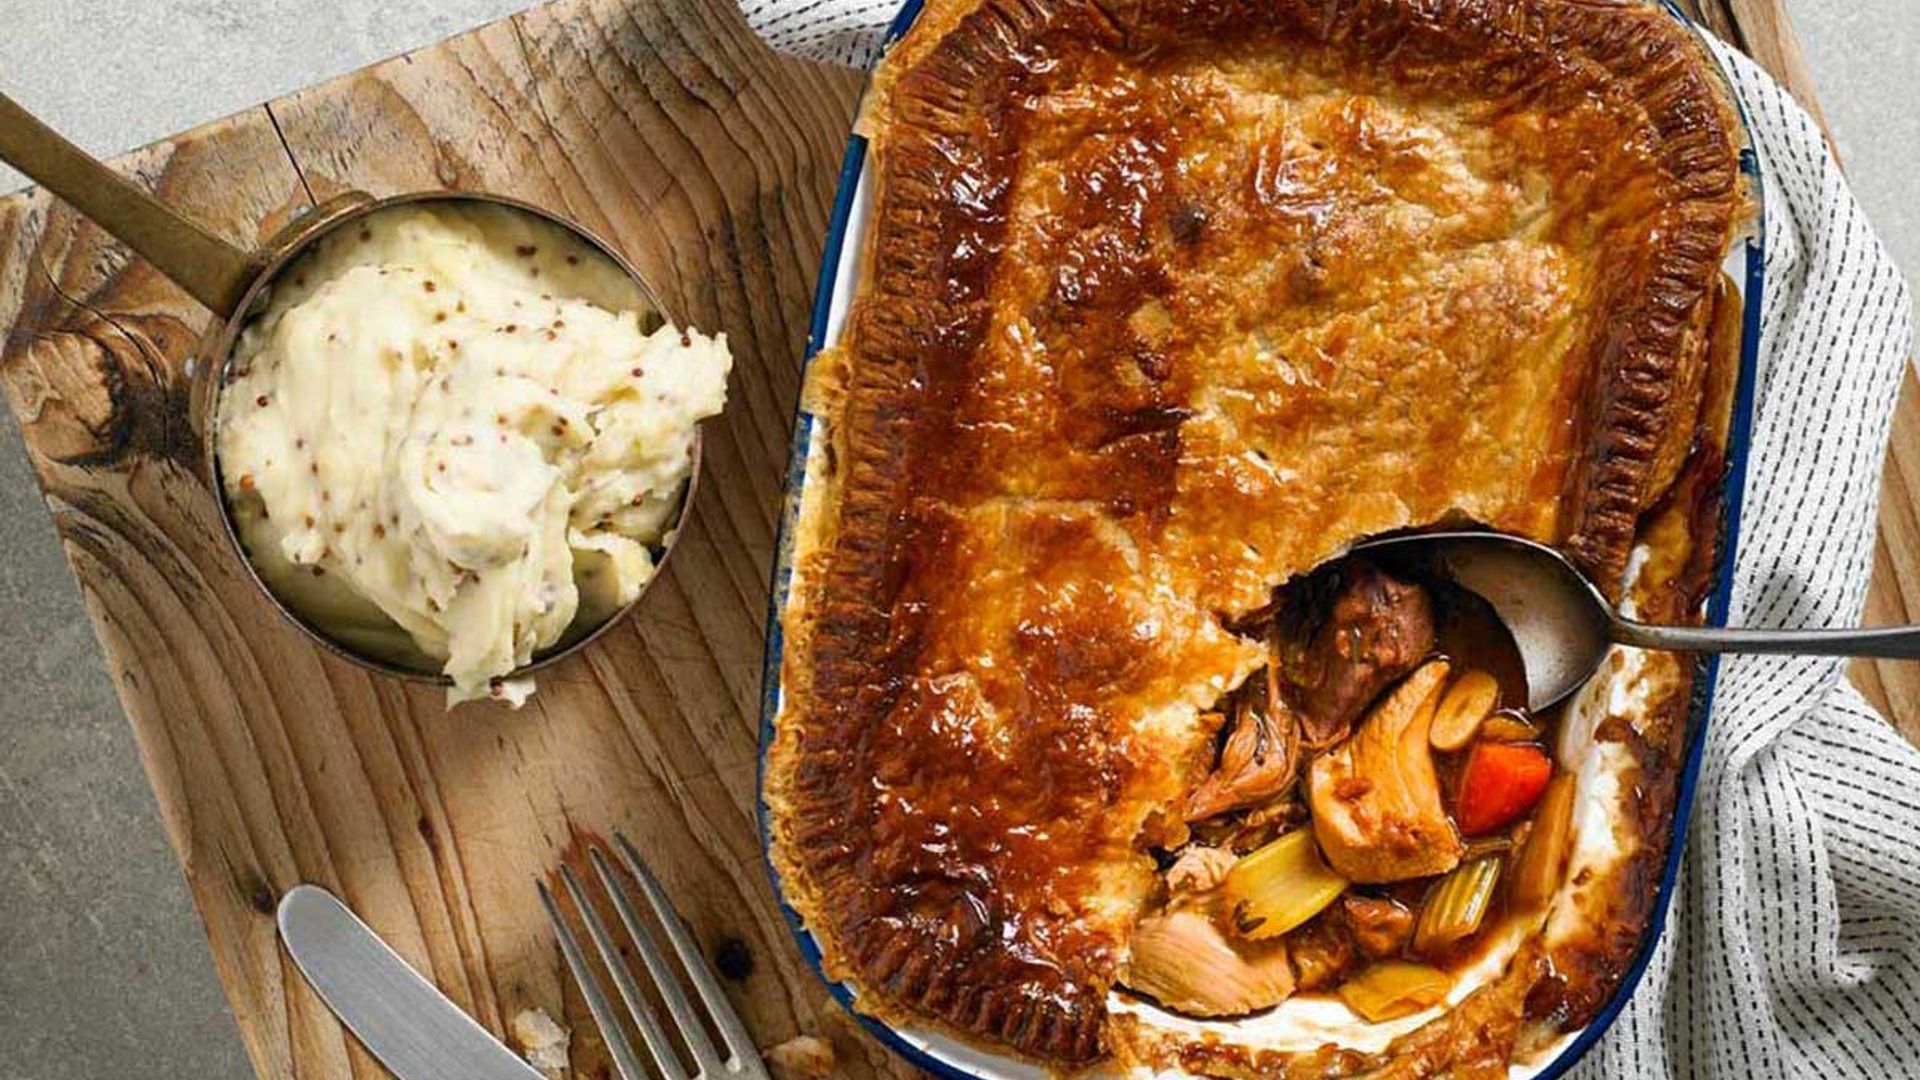 Celebrate British Game Week with this low-fat & lean pie recipe